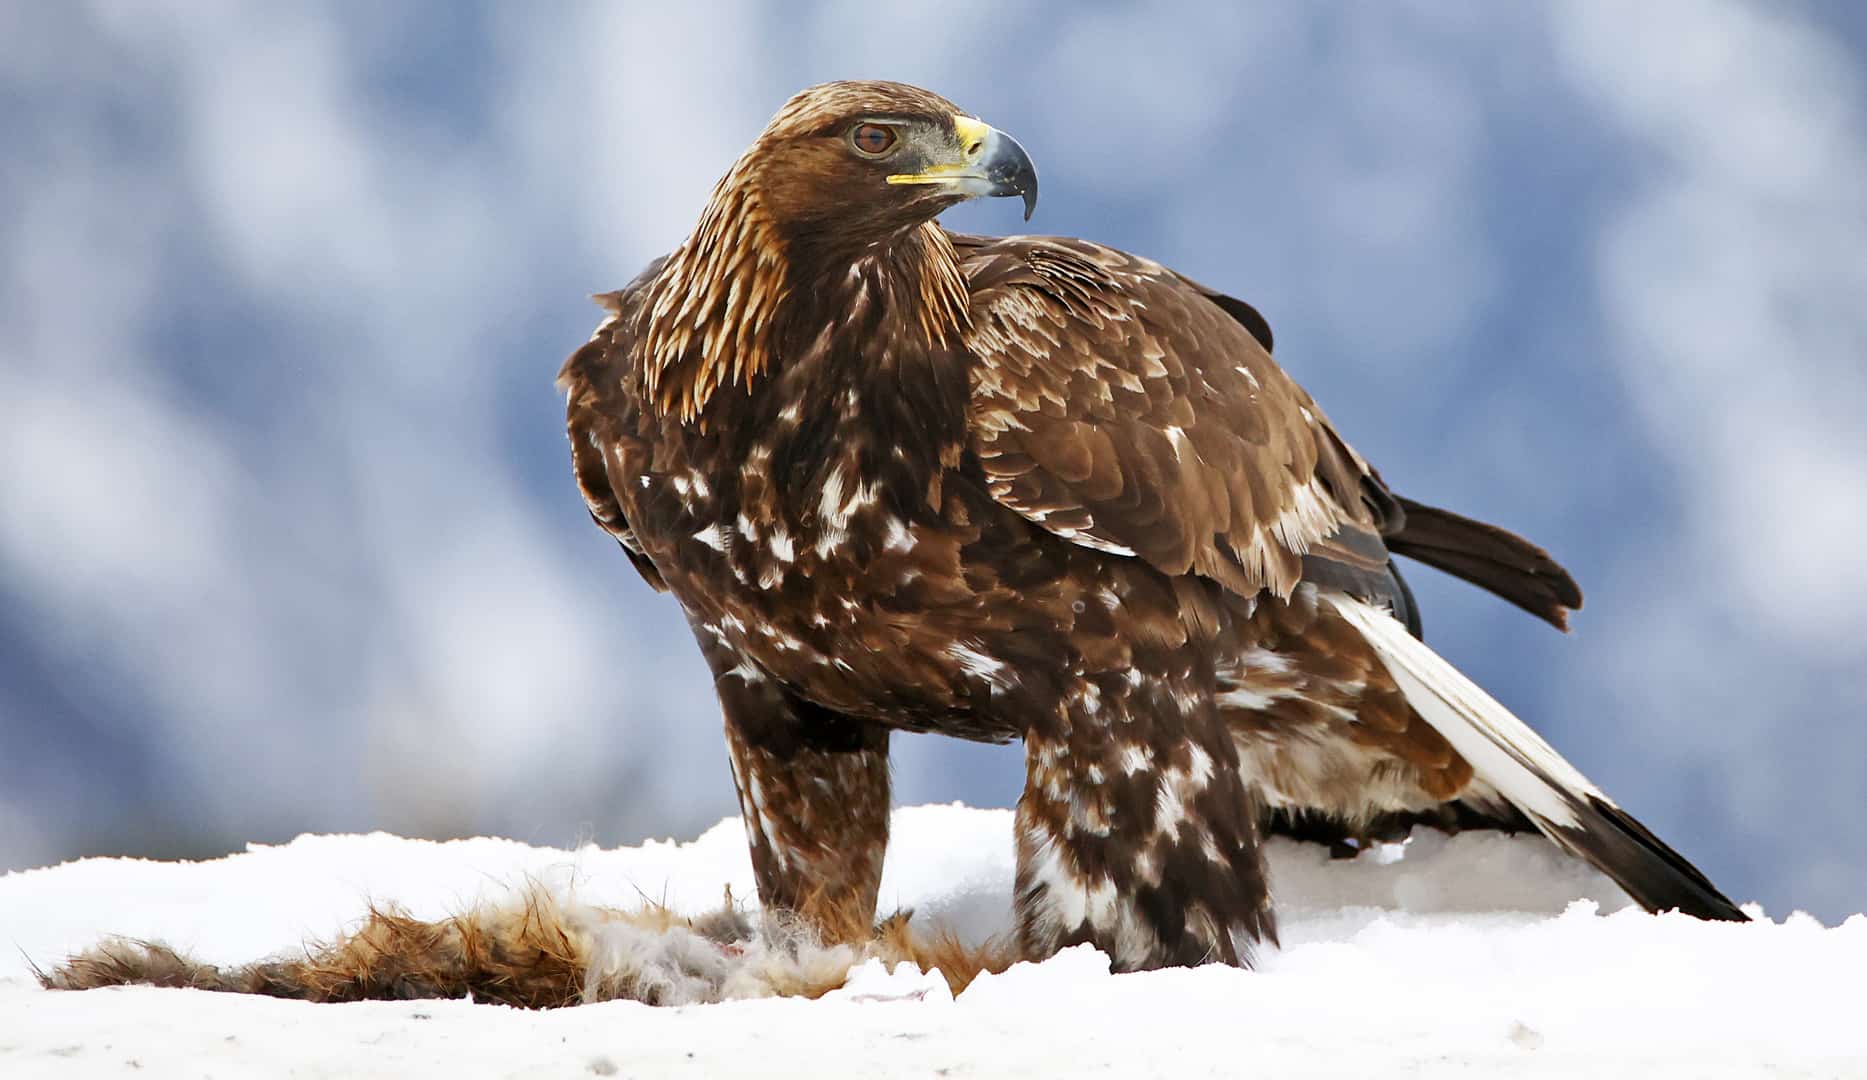 A meal for the Golden Eagles